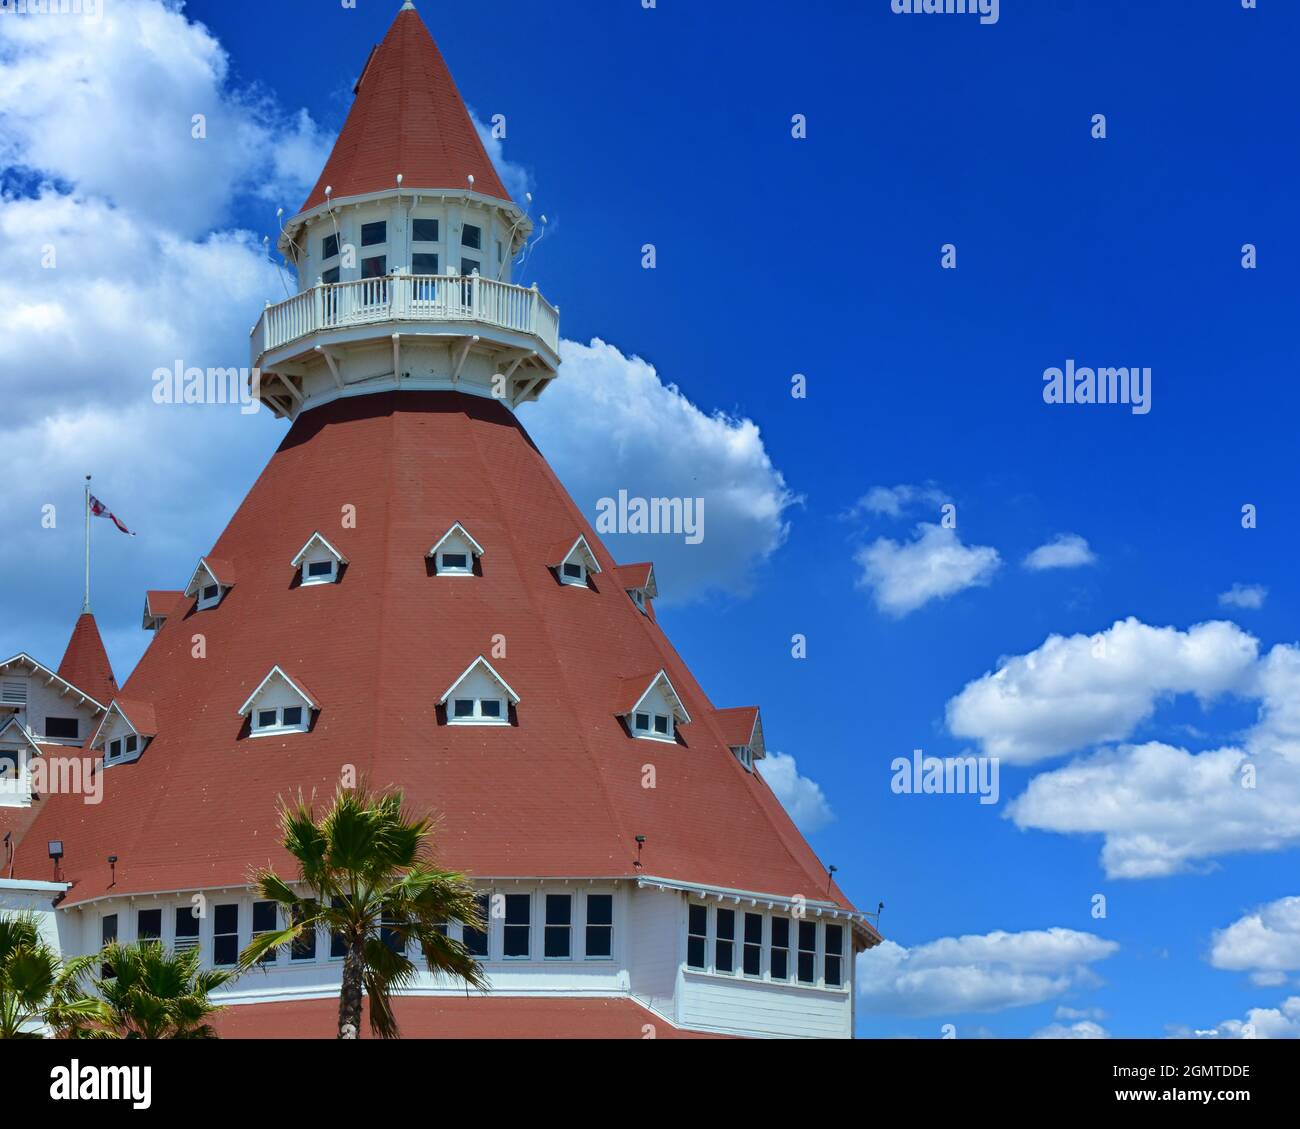 Close up of the unique red turret of the iconic 1888 Queen Anne Victorian style Hotel del Coronado in San Diego, CA against blue sky Stock Photo